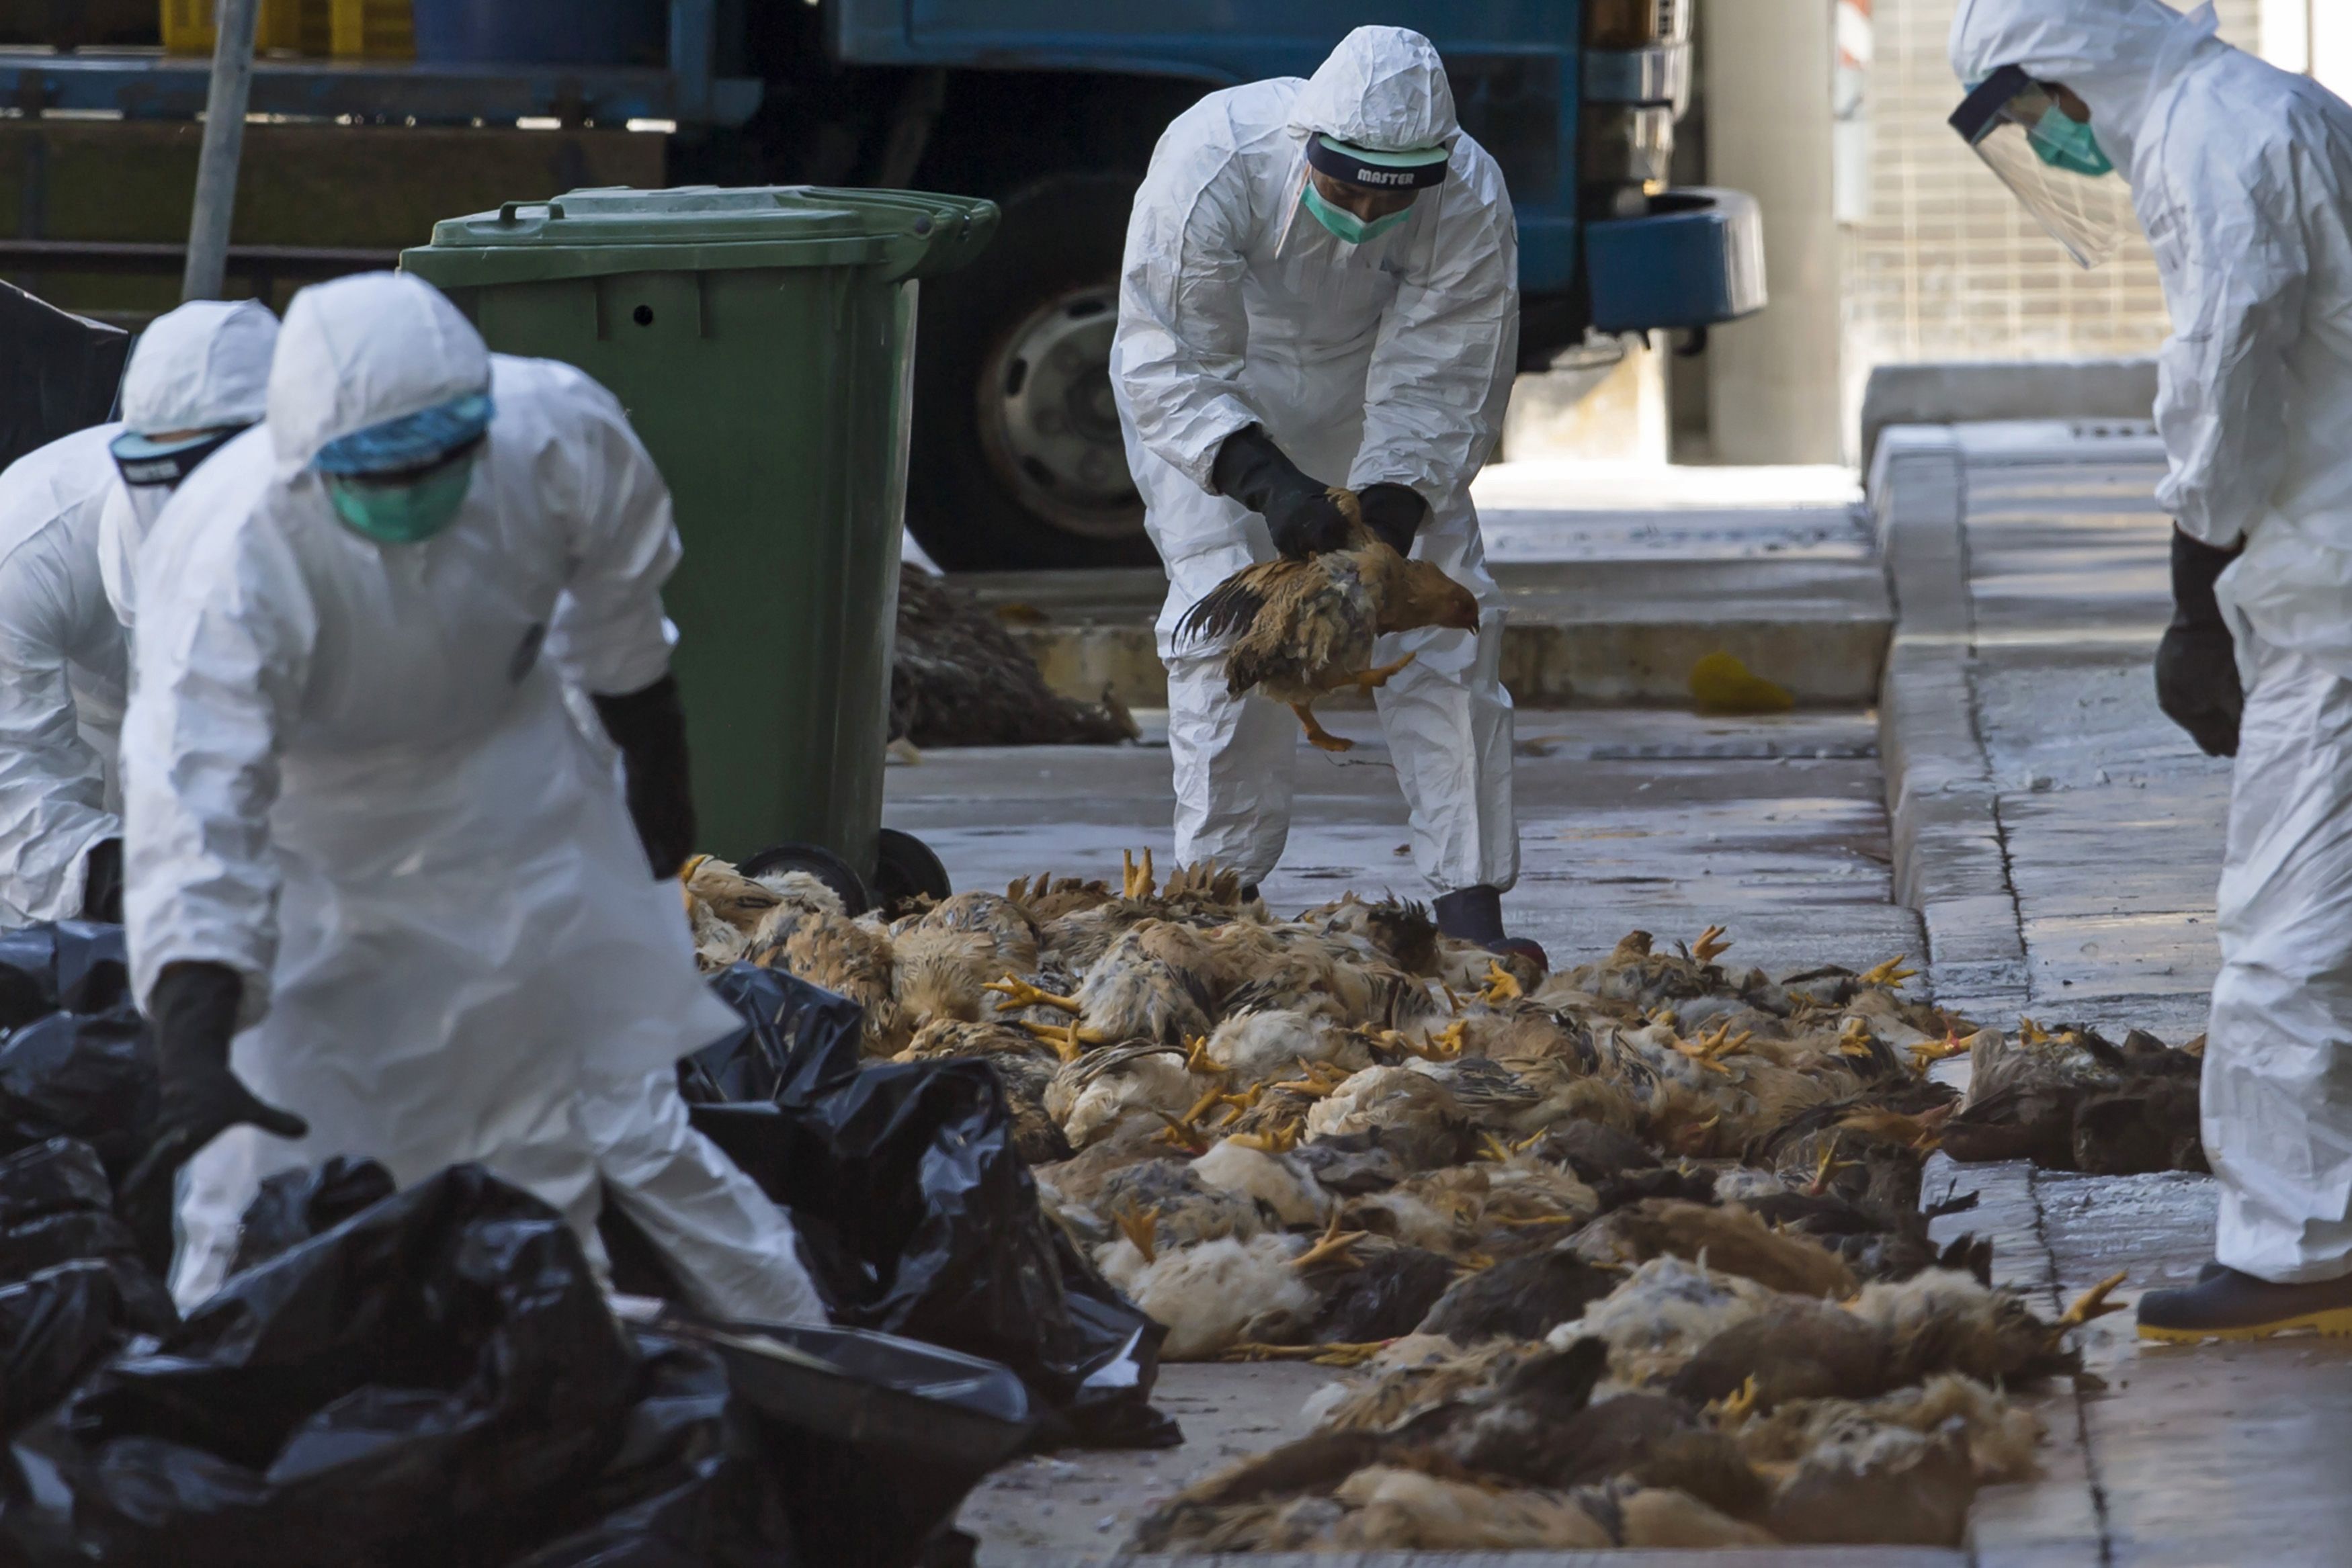 Health workers pack dead chickens into trash bins at a wholesale poultry market in Hong Kong December 31, 2014. Hong Kong began culling 15,000 chickens on Wednesday and suspended imports of live poultry from mainland China for 21 days after the H7 bird flu strain was discovered in a batch of live chickens that came from the southern province of Guangdong. REUTERS/Tyrone Siu (CHINA - Tags: HEALTH AGRICULTURE ANIMALS FOOD POLITICS)